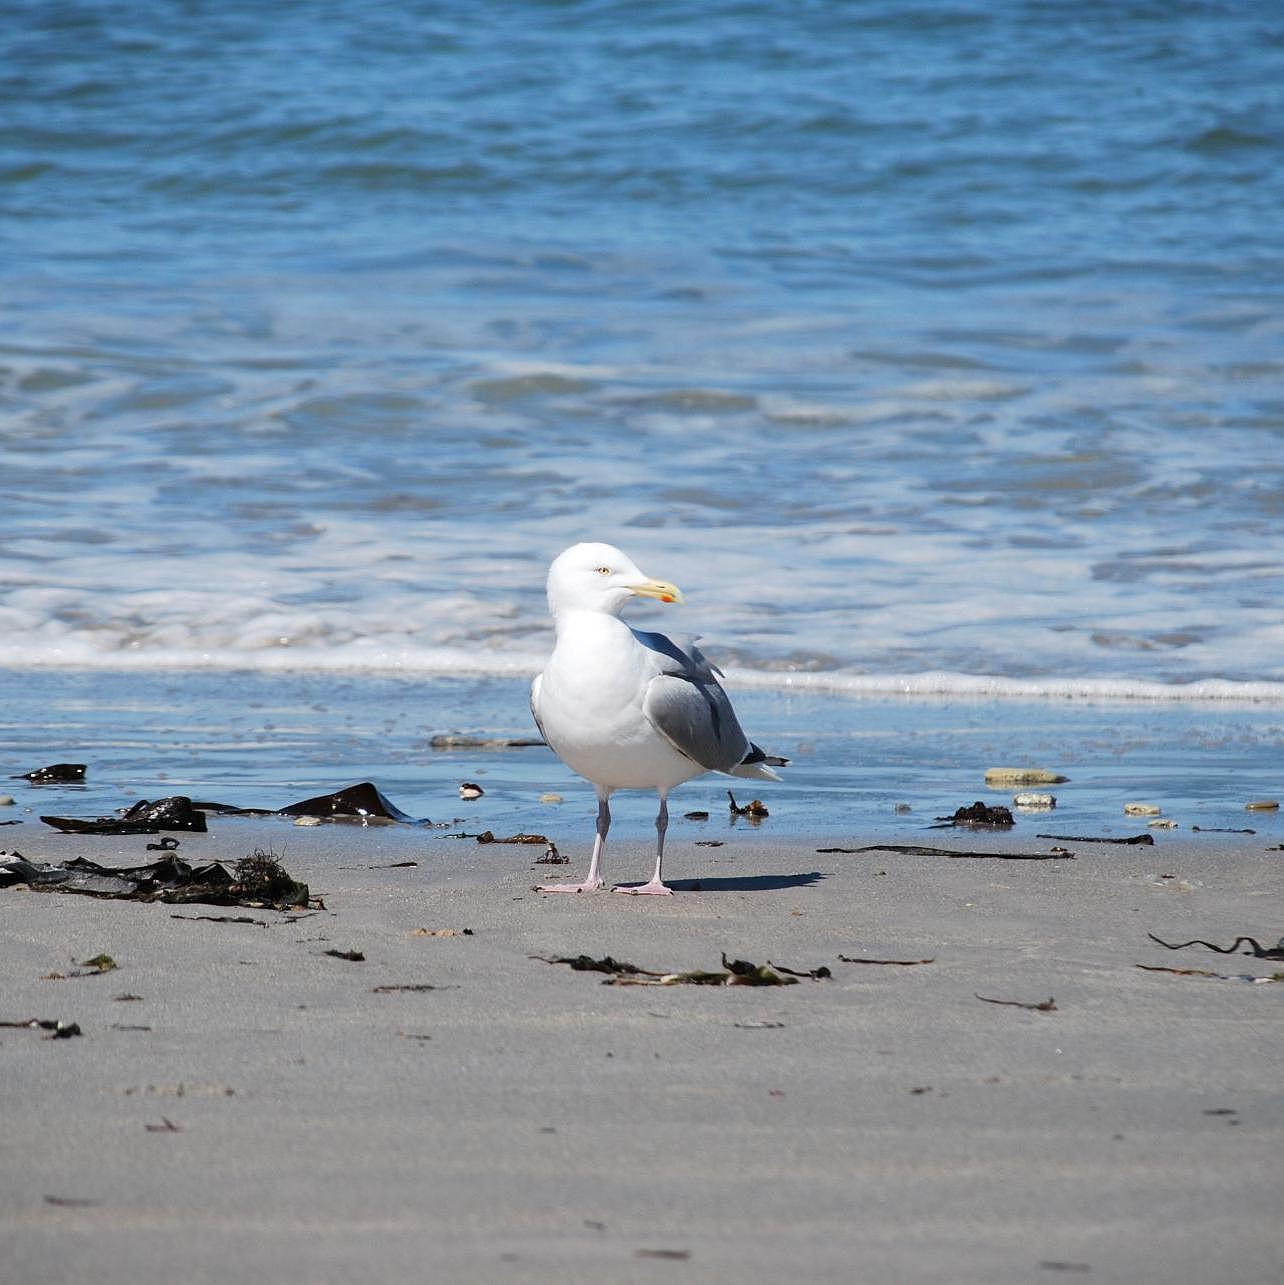 Seagull at the beach surrounded by a little seaweed